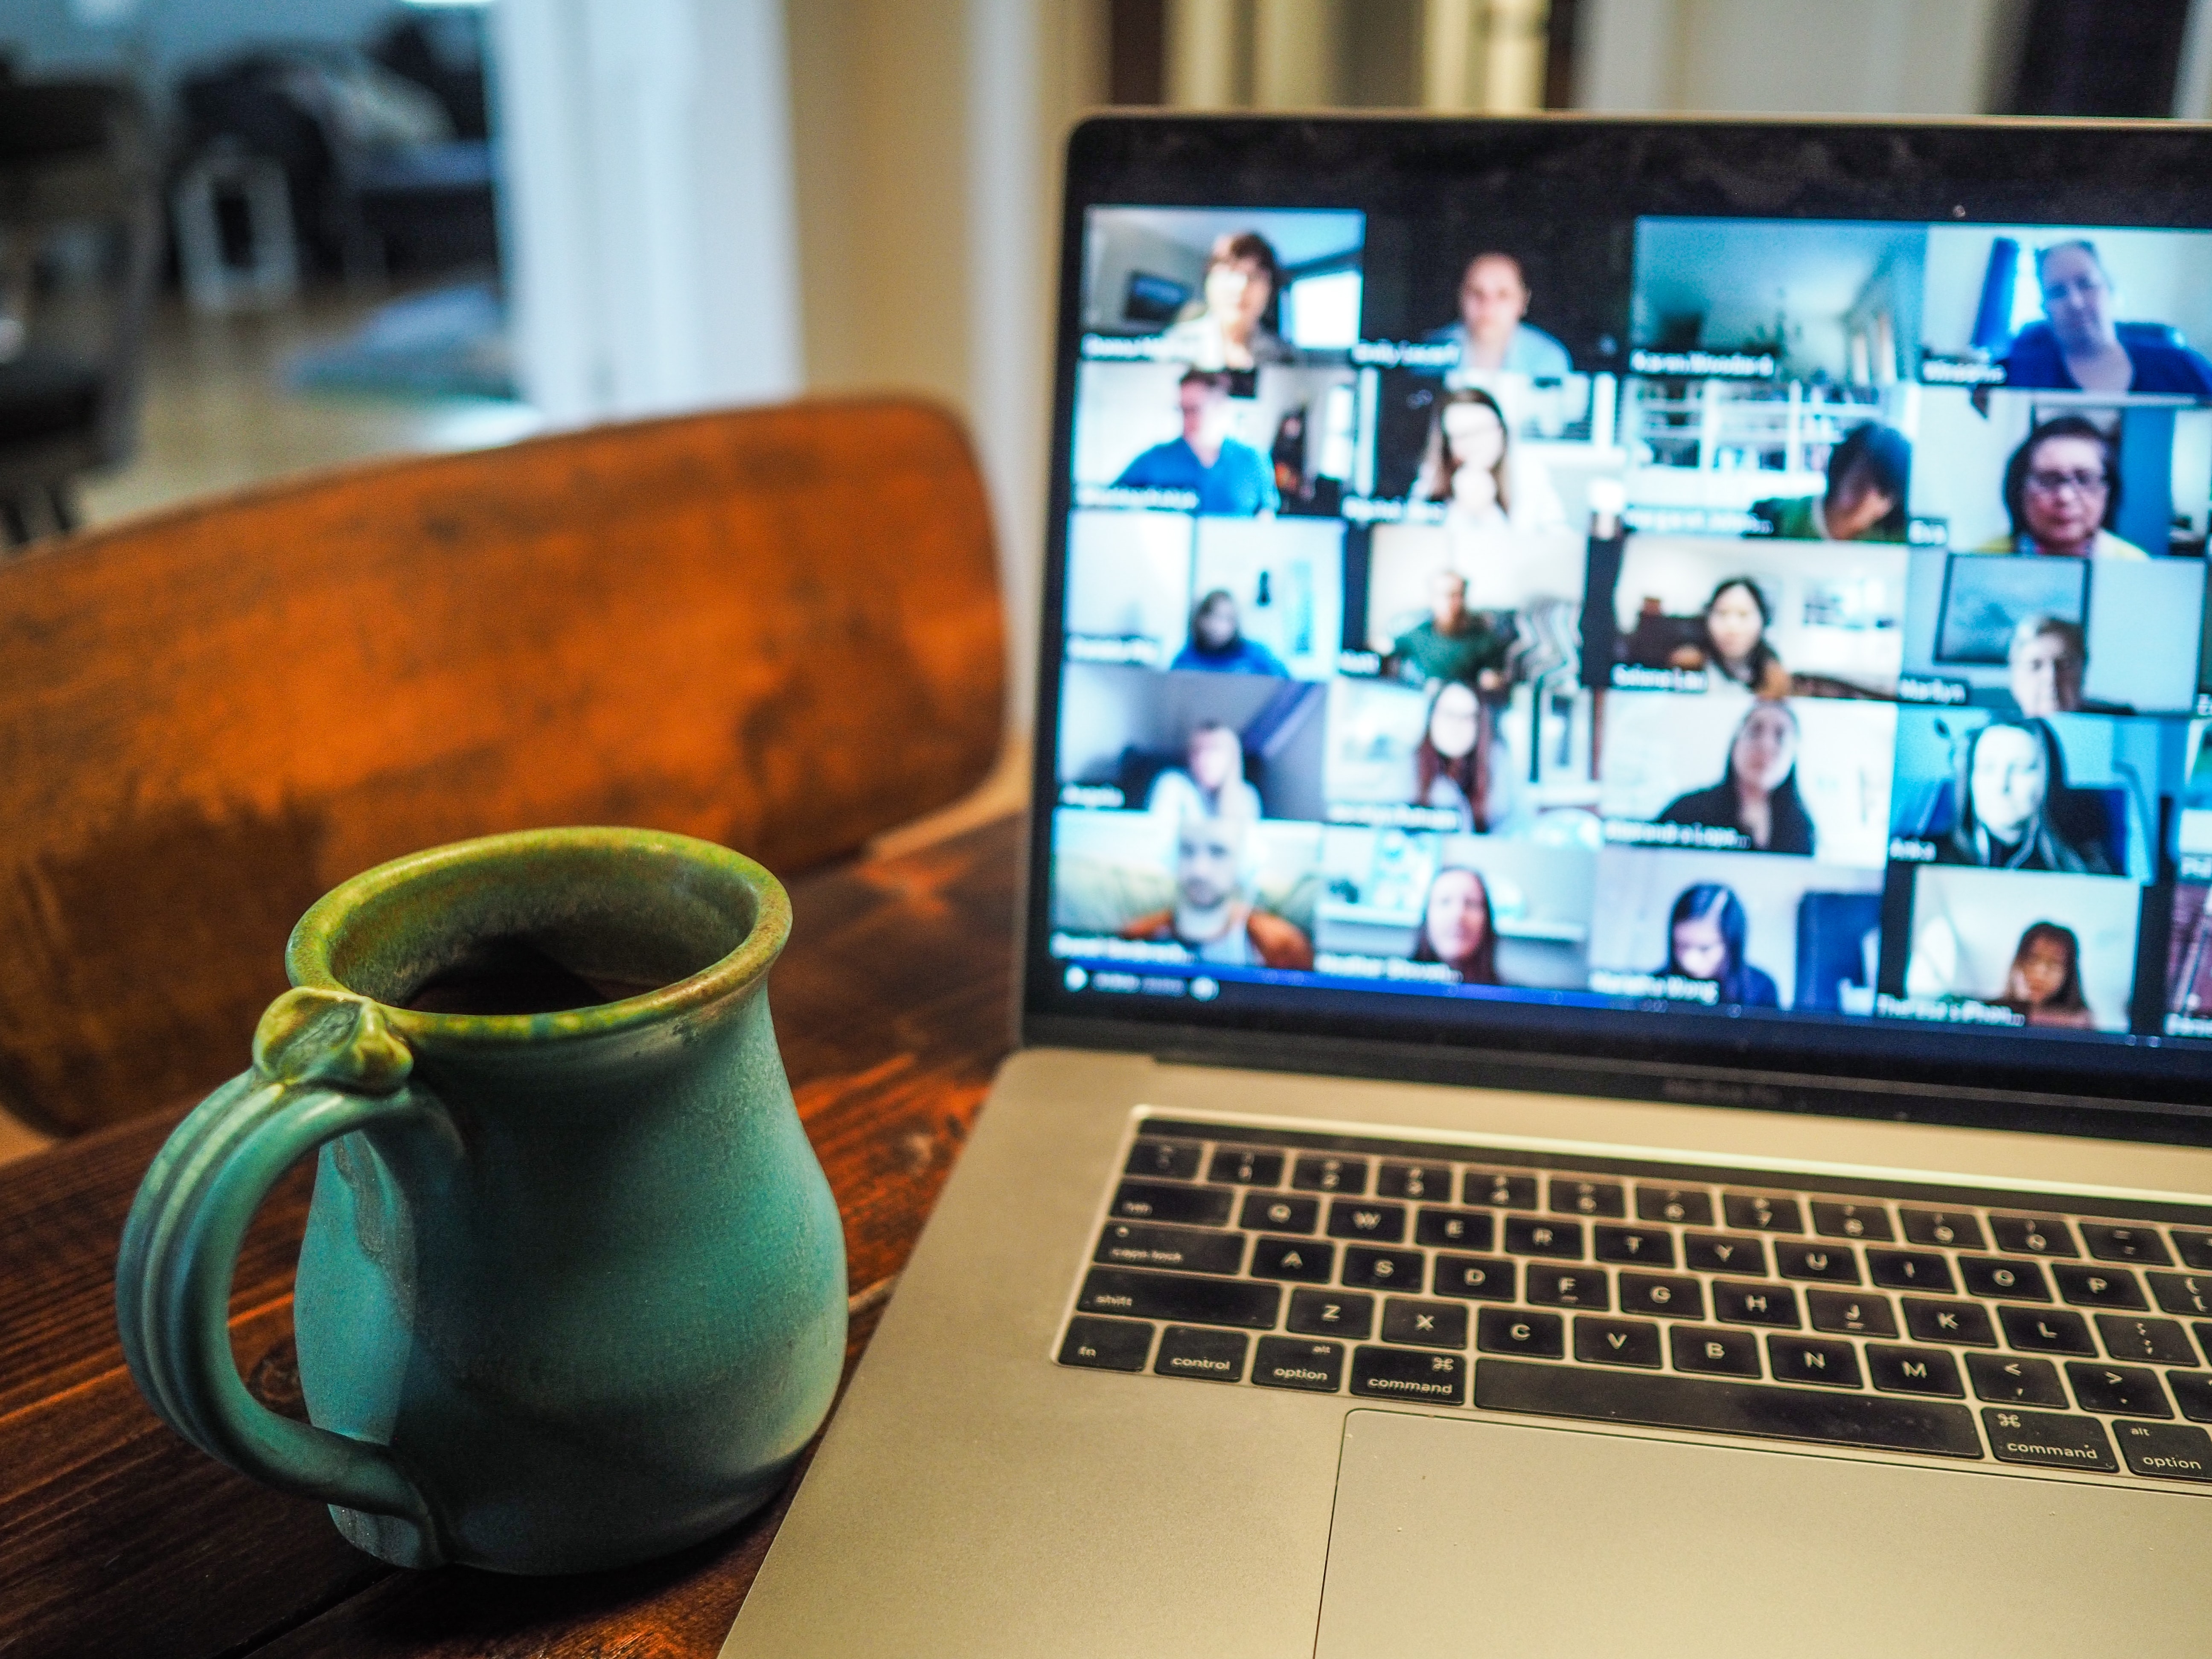 A mug next to a laptop with a screen showing a video conference